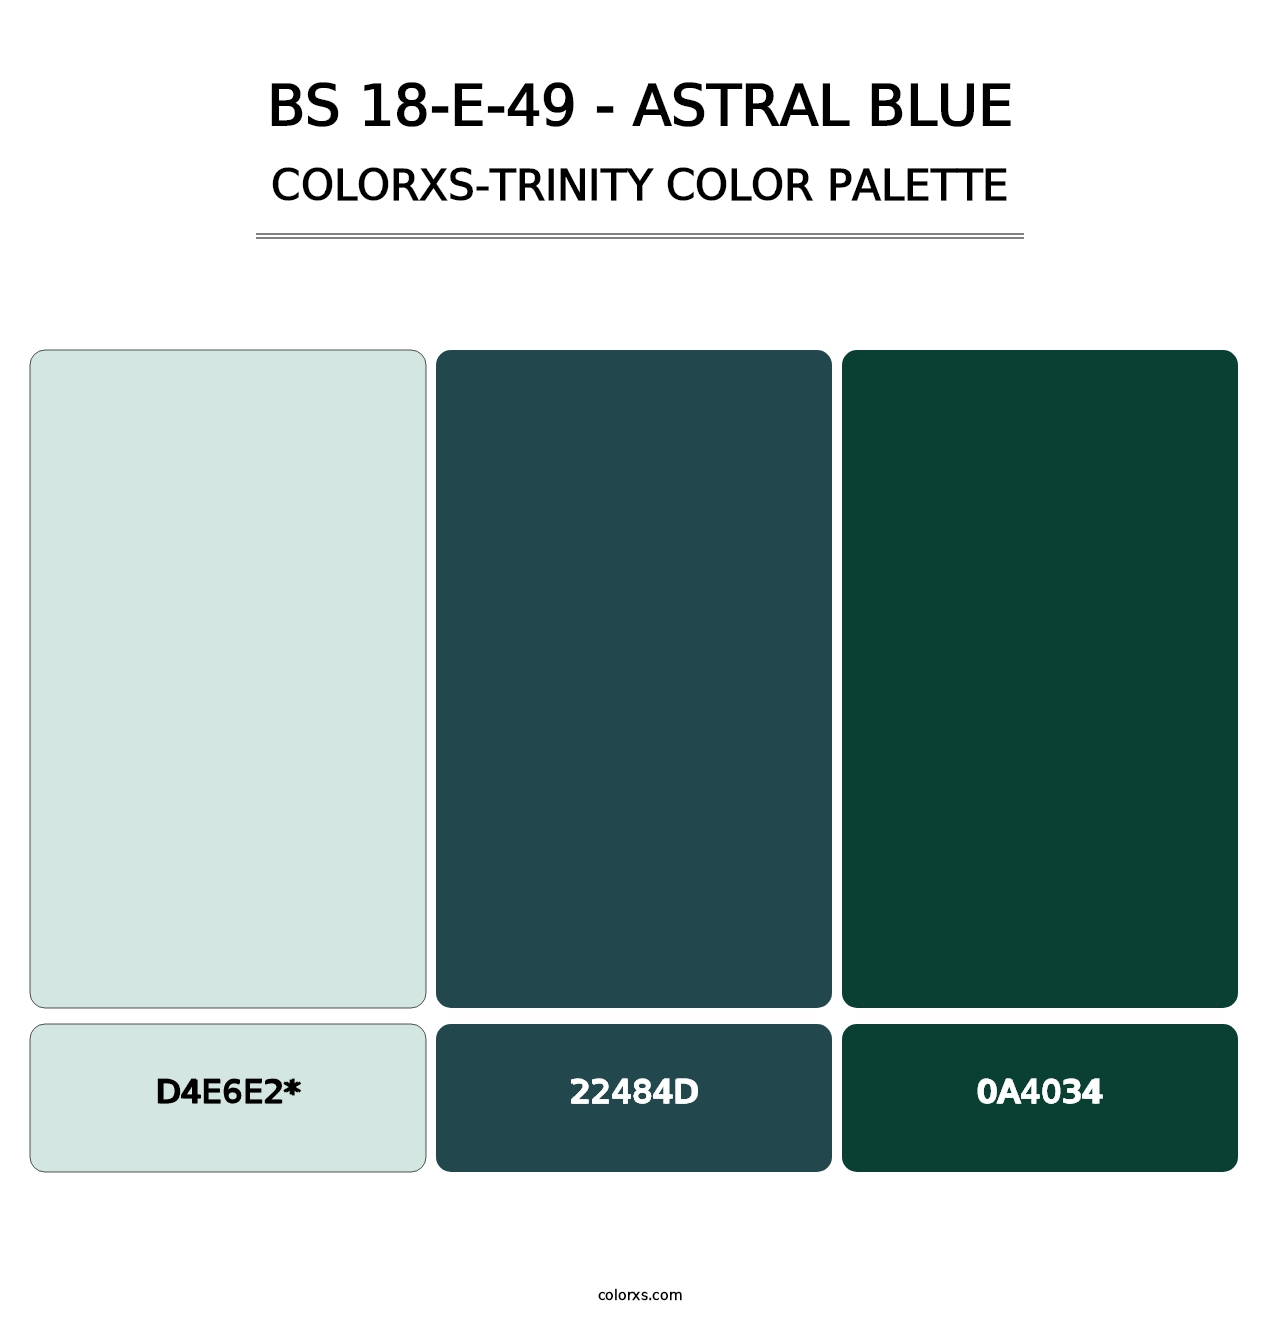 BS 18-E-49 - Astral Blue - Colorxs Trinity Palette